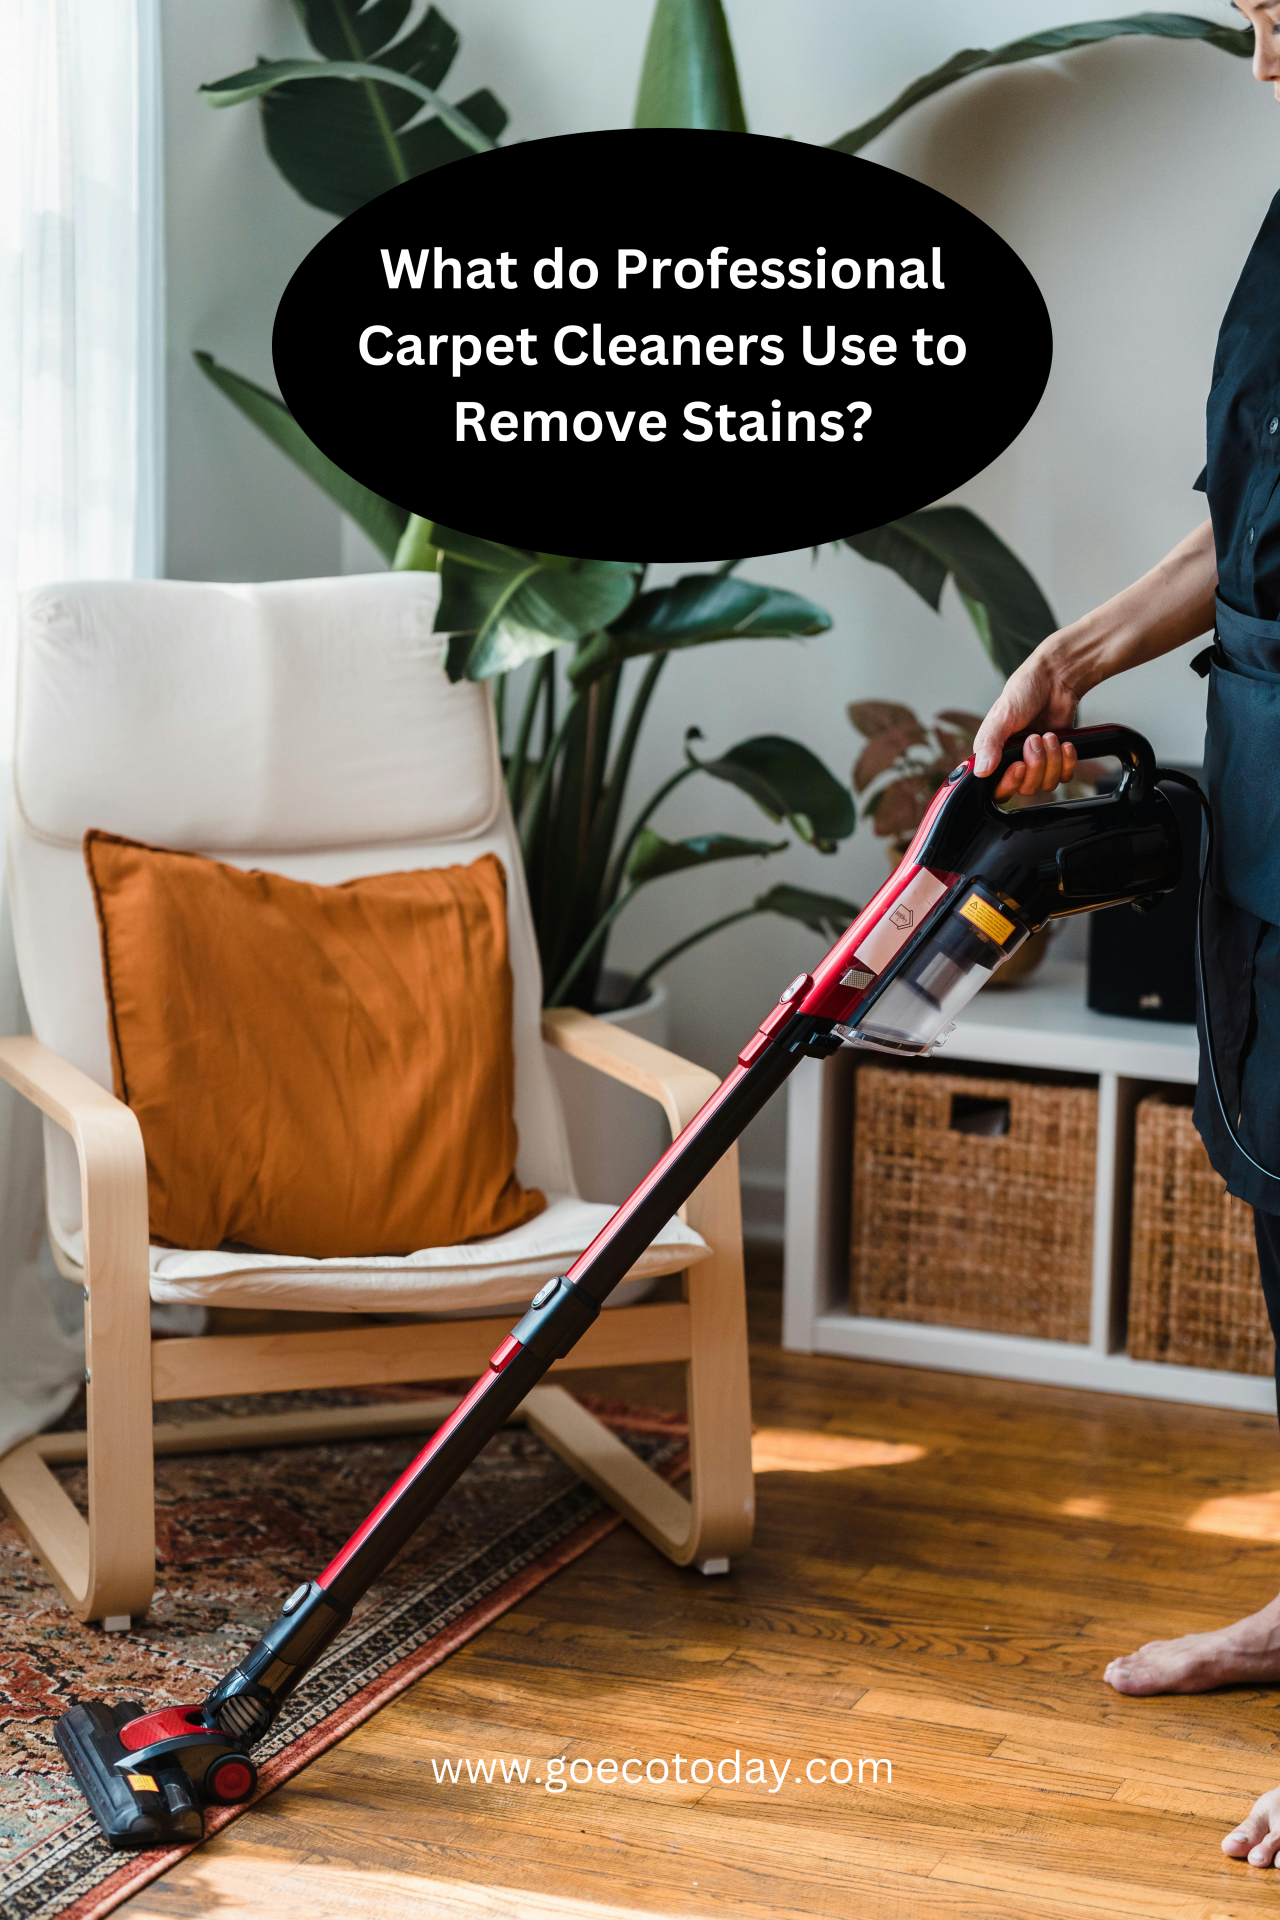 Non-Toxic Carpet Cleaning Companies